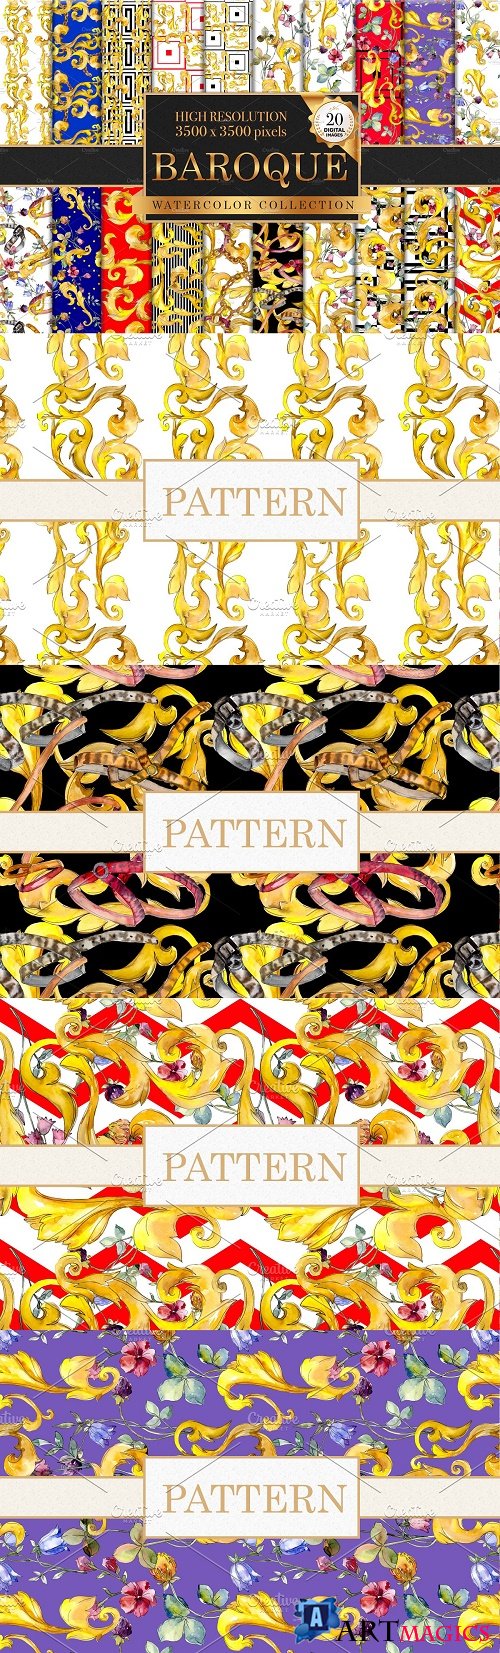 Patterns watercolor png - 3840774